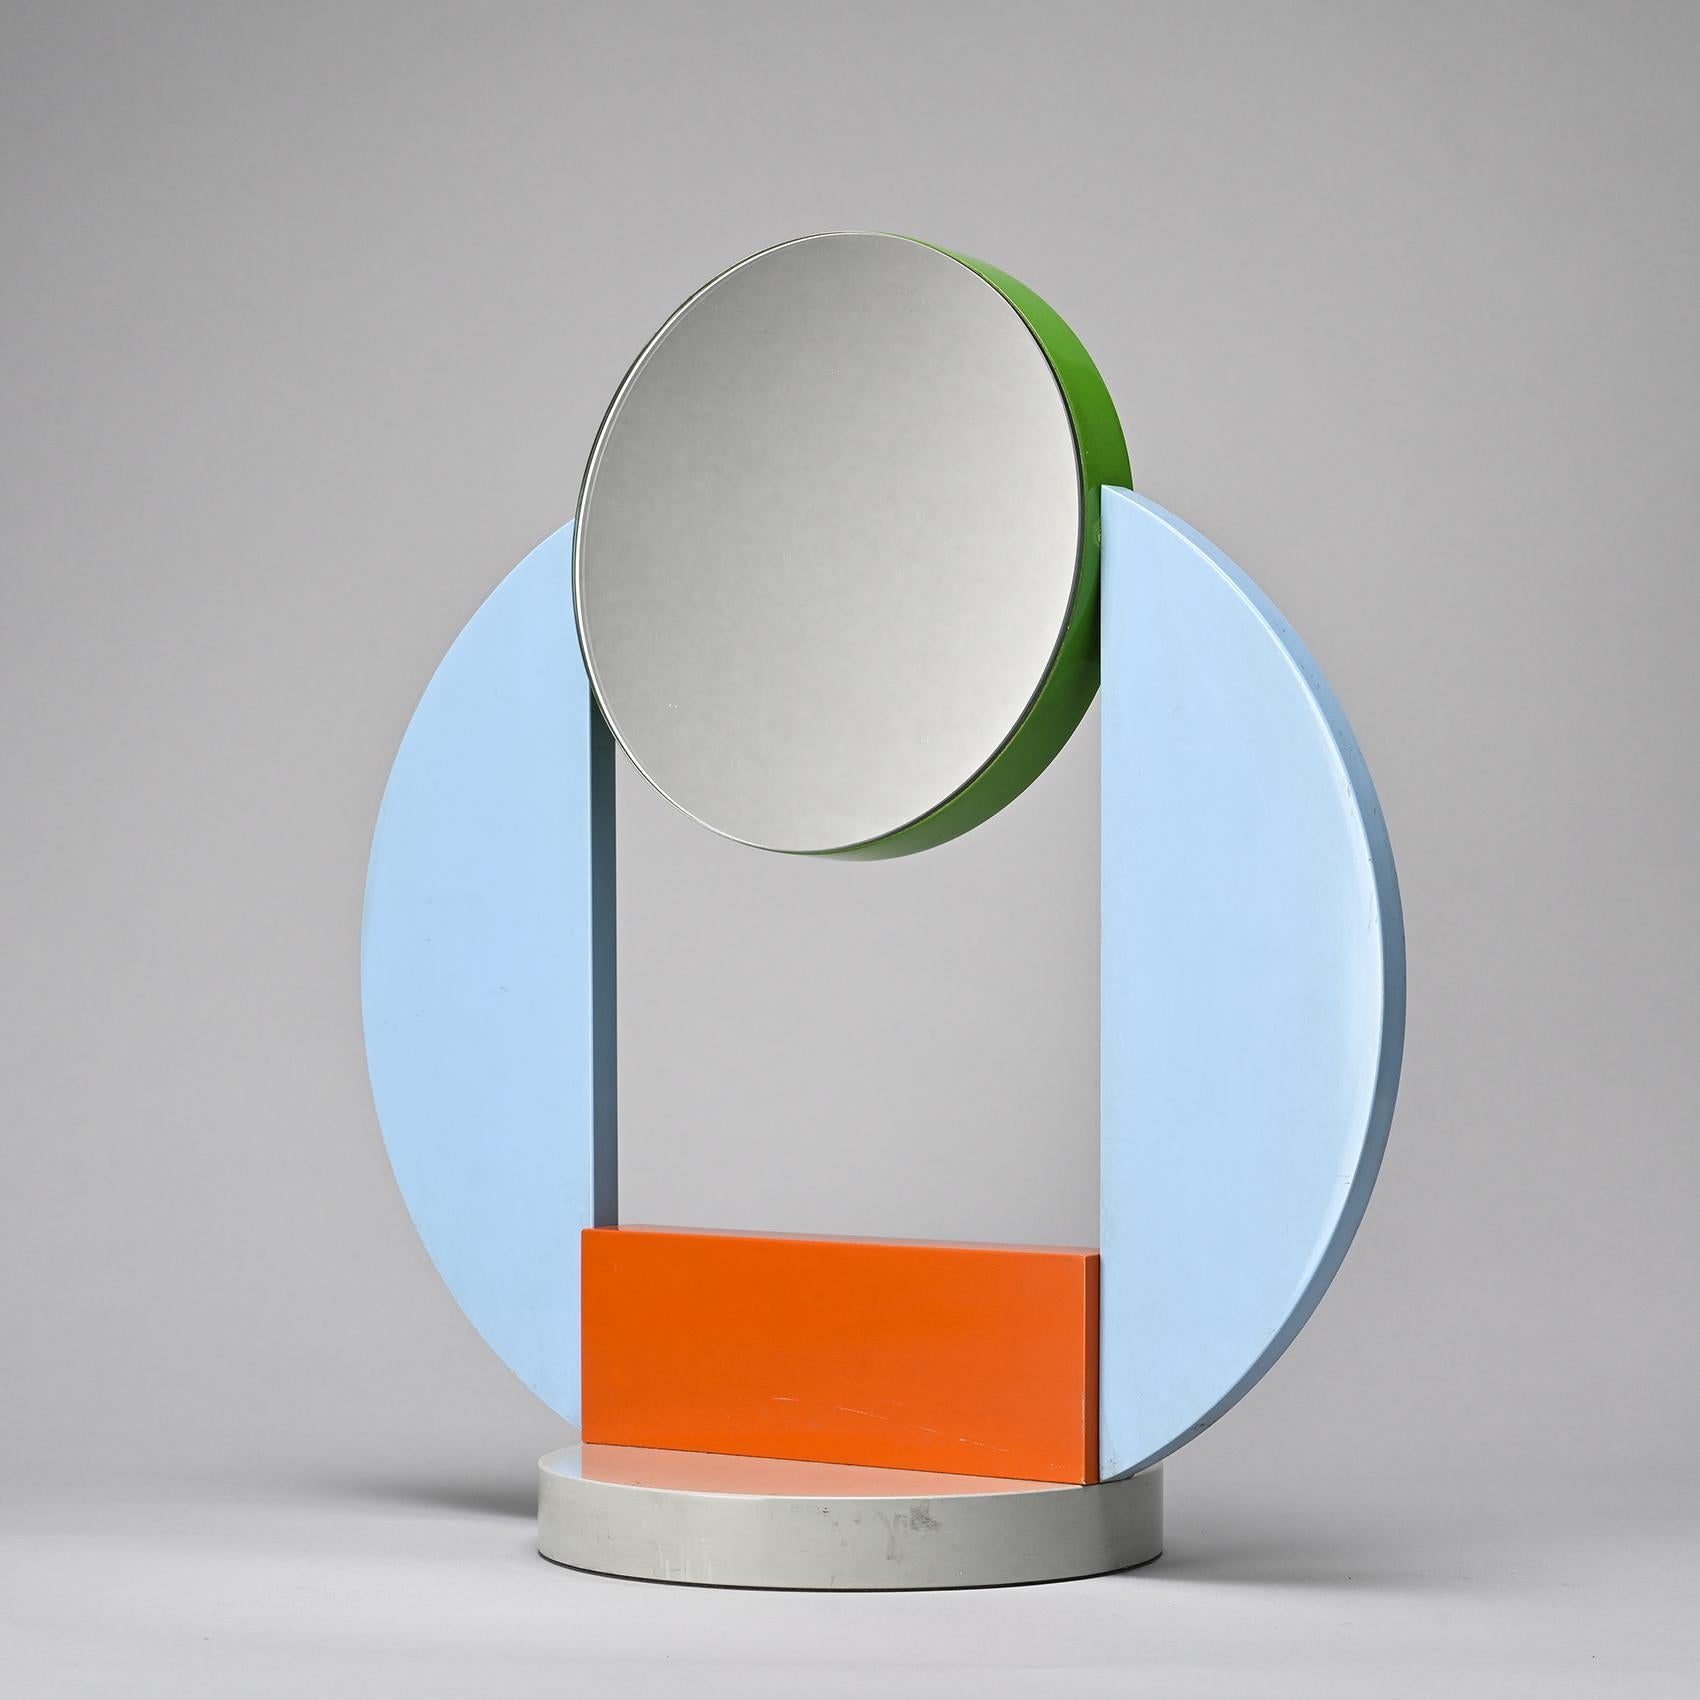 Table mirror designed by Michele de Lucchi in 1985 in limited edition for the Italian magazine 